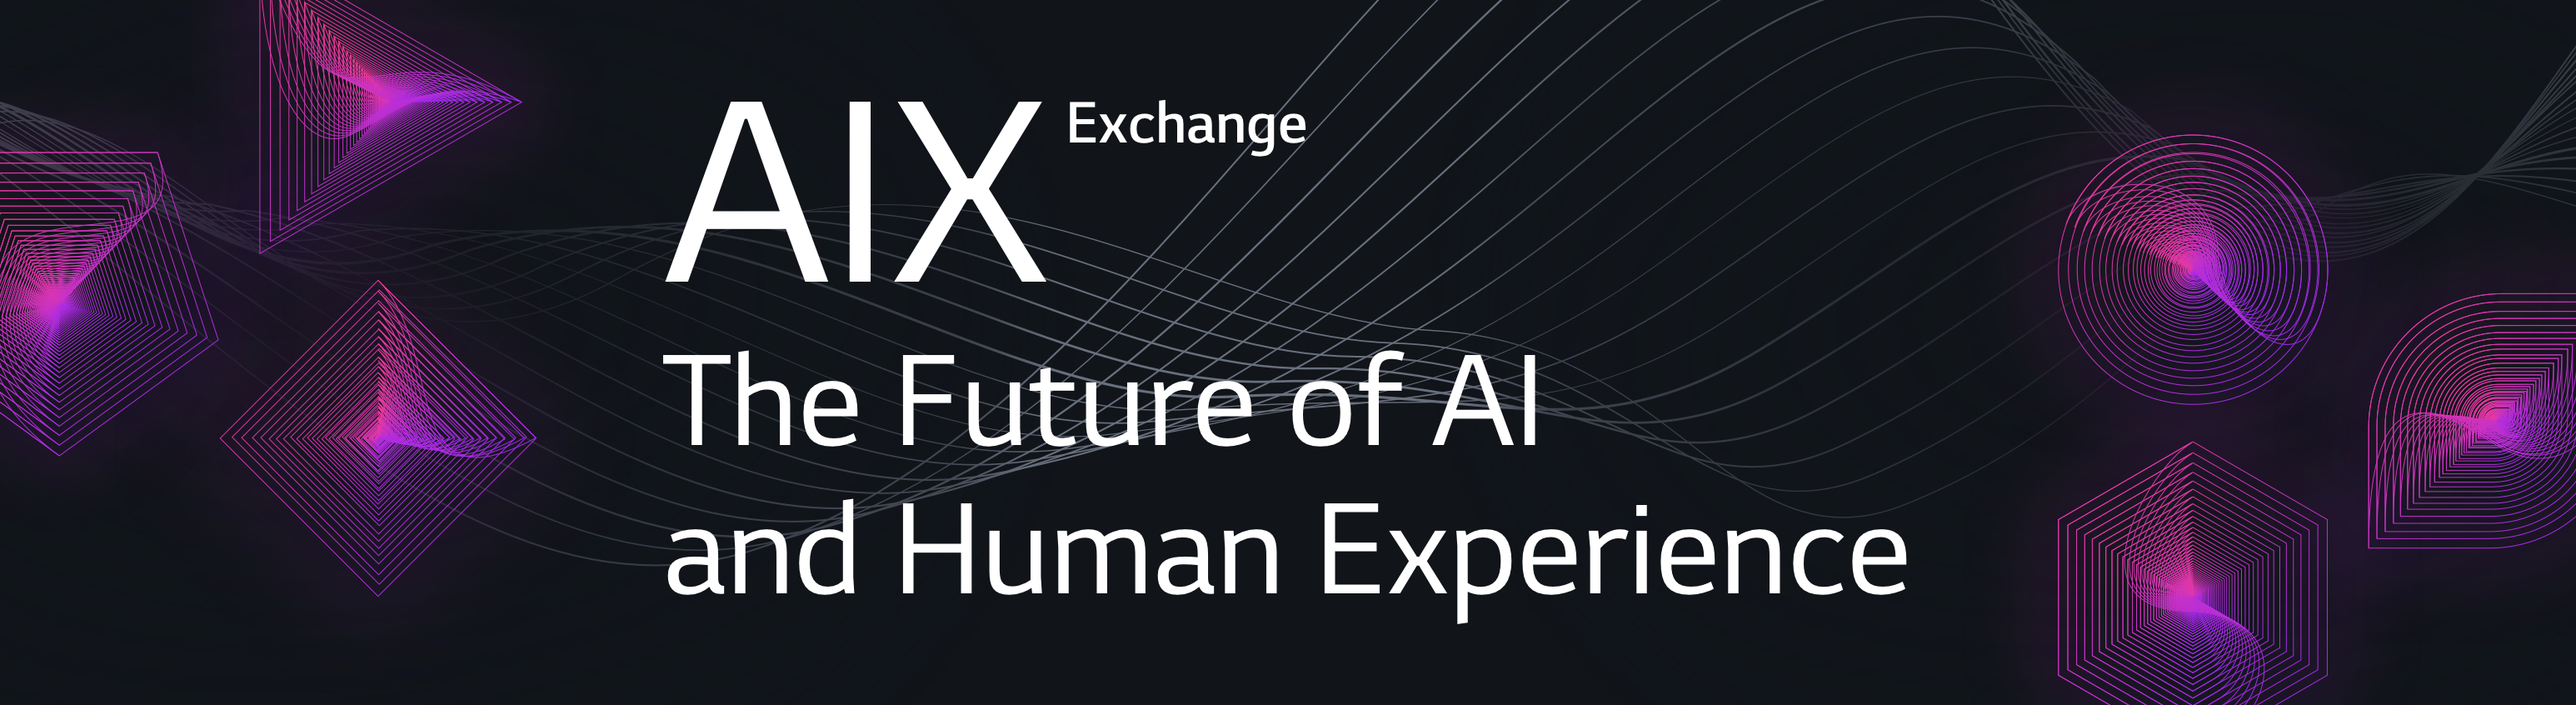 AIX Exchange banner Image, The Future of AI and Human Experience